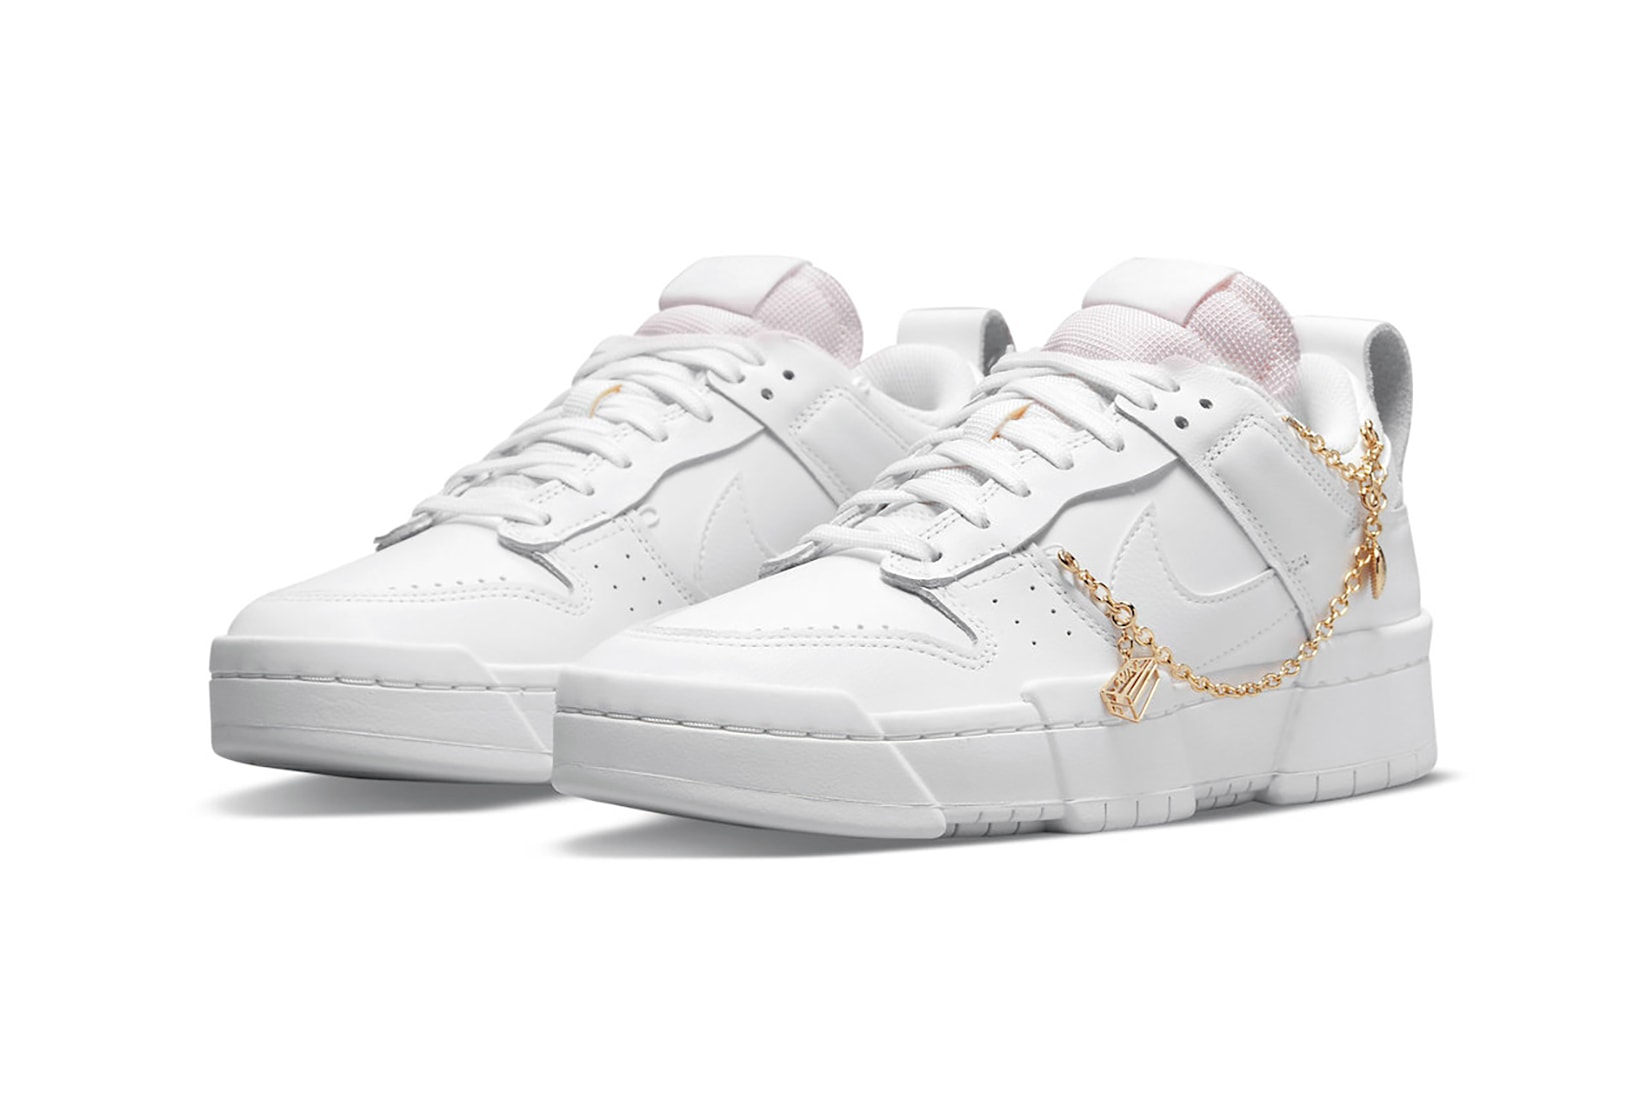 Nike Womens Sneakers Dunk Low Disrupt Gold Charms White Light Pink Footwear Kicks Shoes Lateral